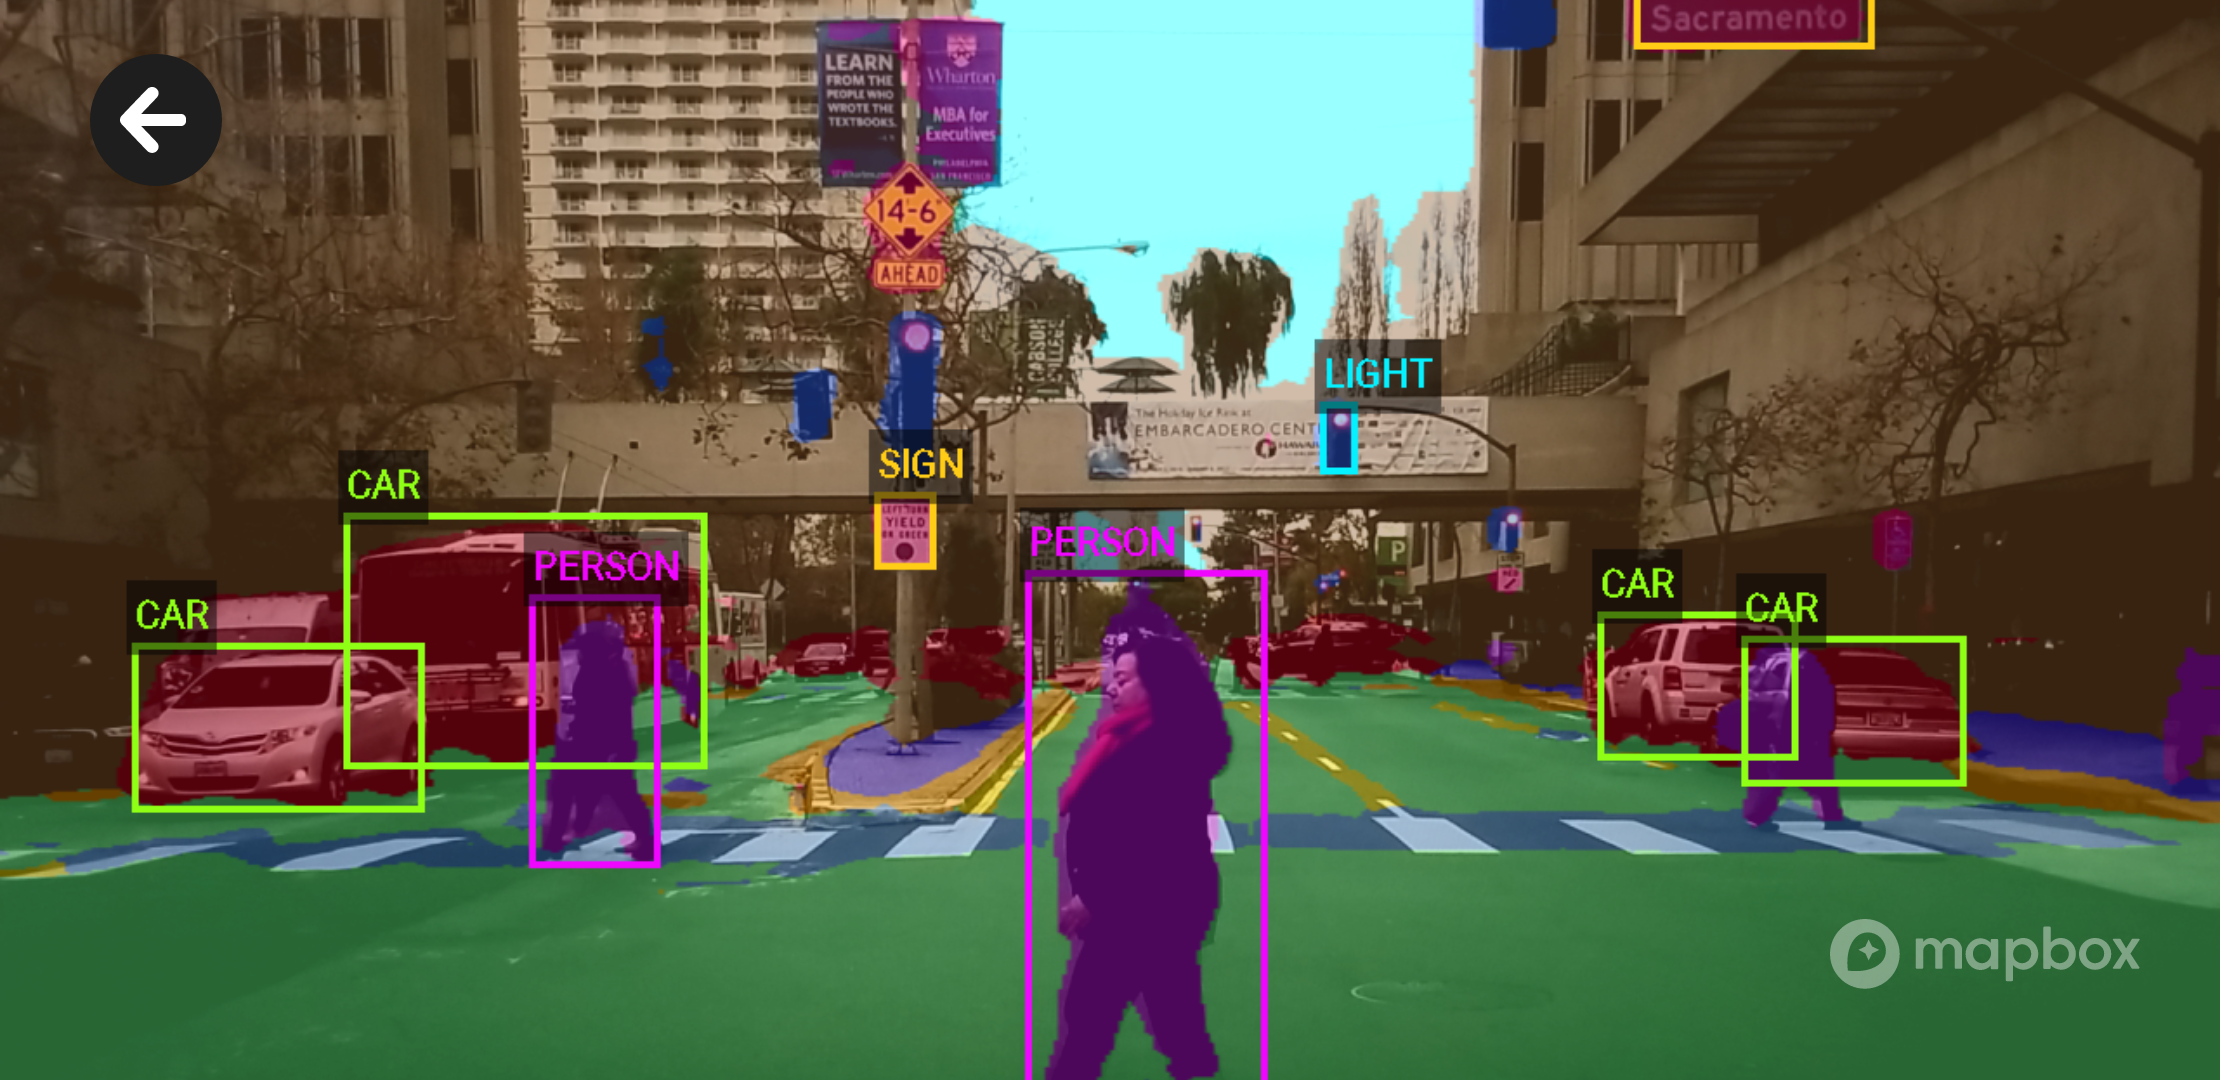 Image of Mapbox Android Vision SDK simultaneously identifying objects in traffic.